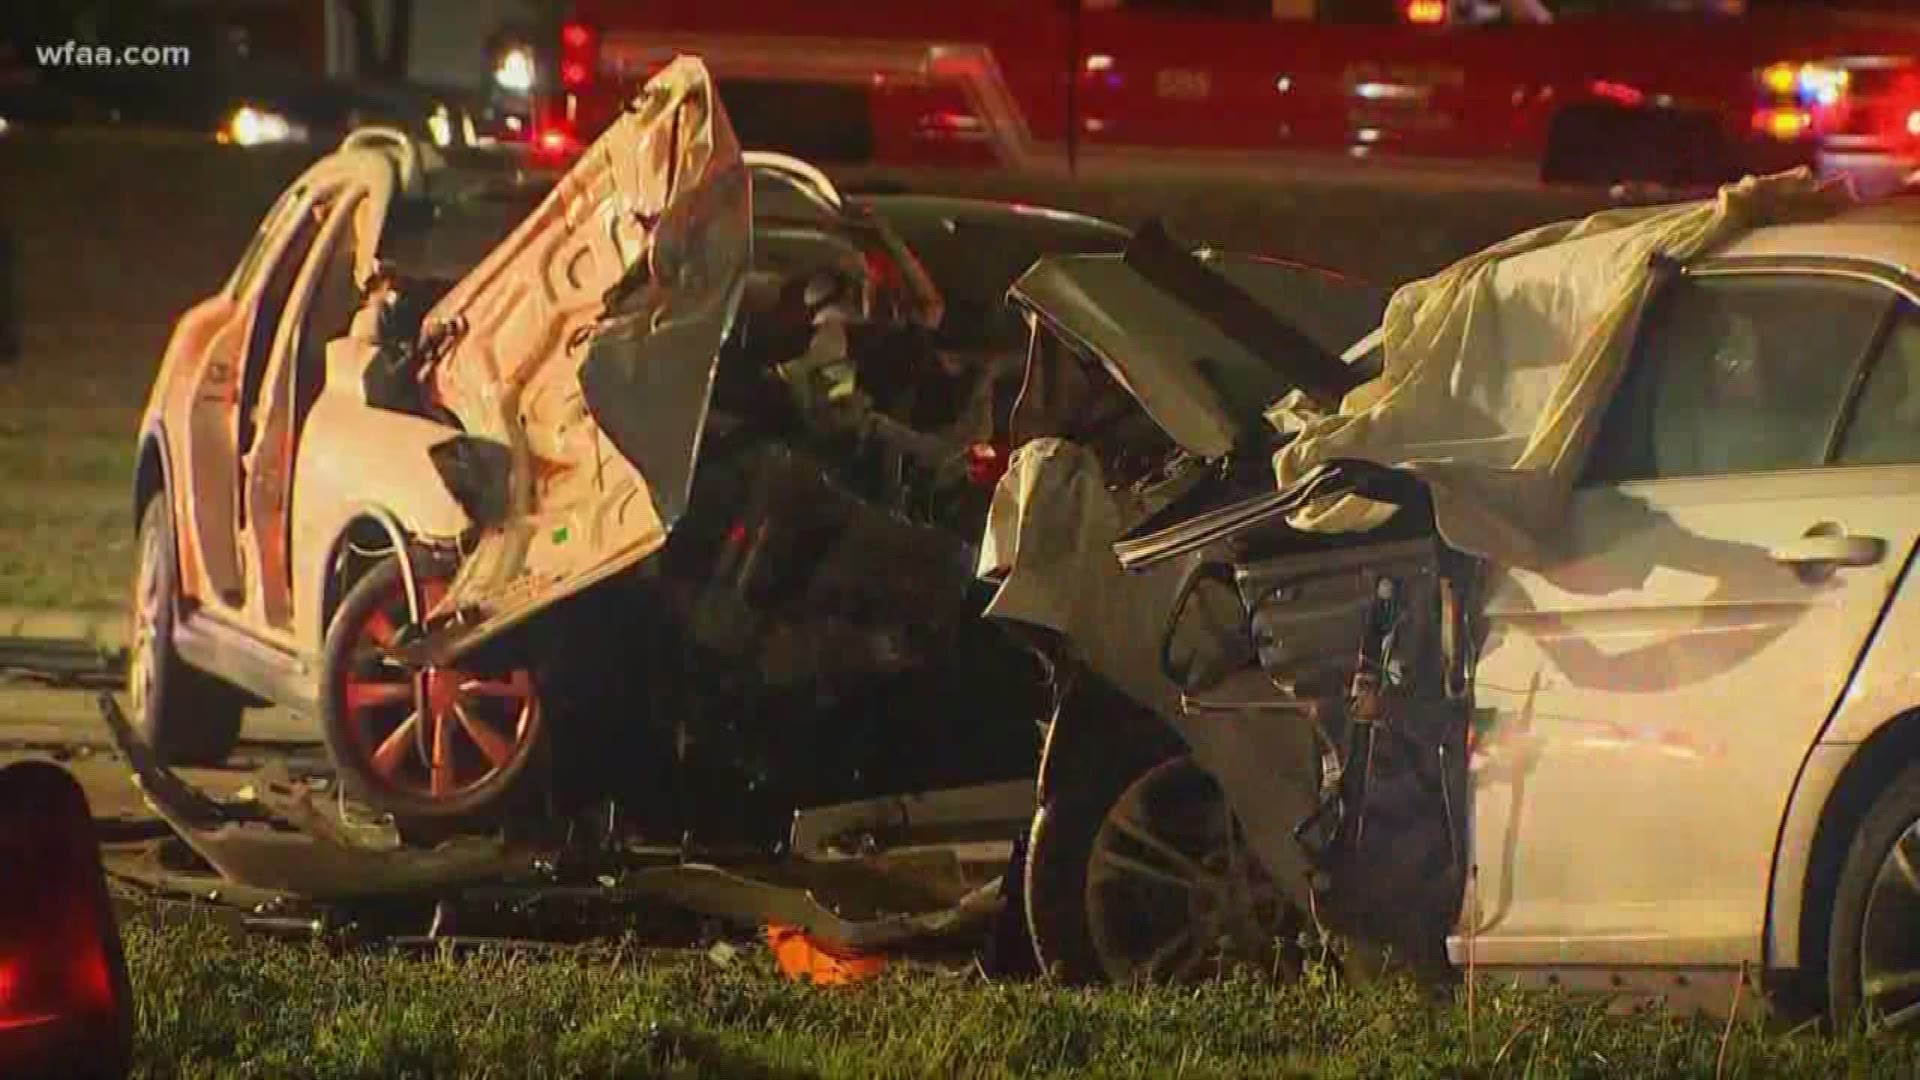 A pregnant woman died in the crash Thursday night and paramedics were unable to save her unborn child.